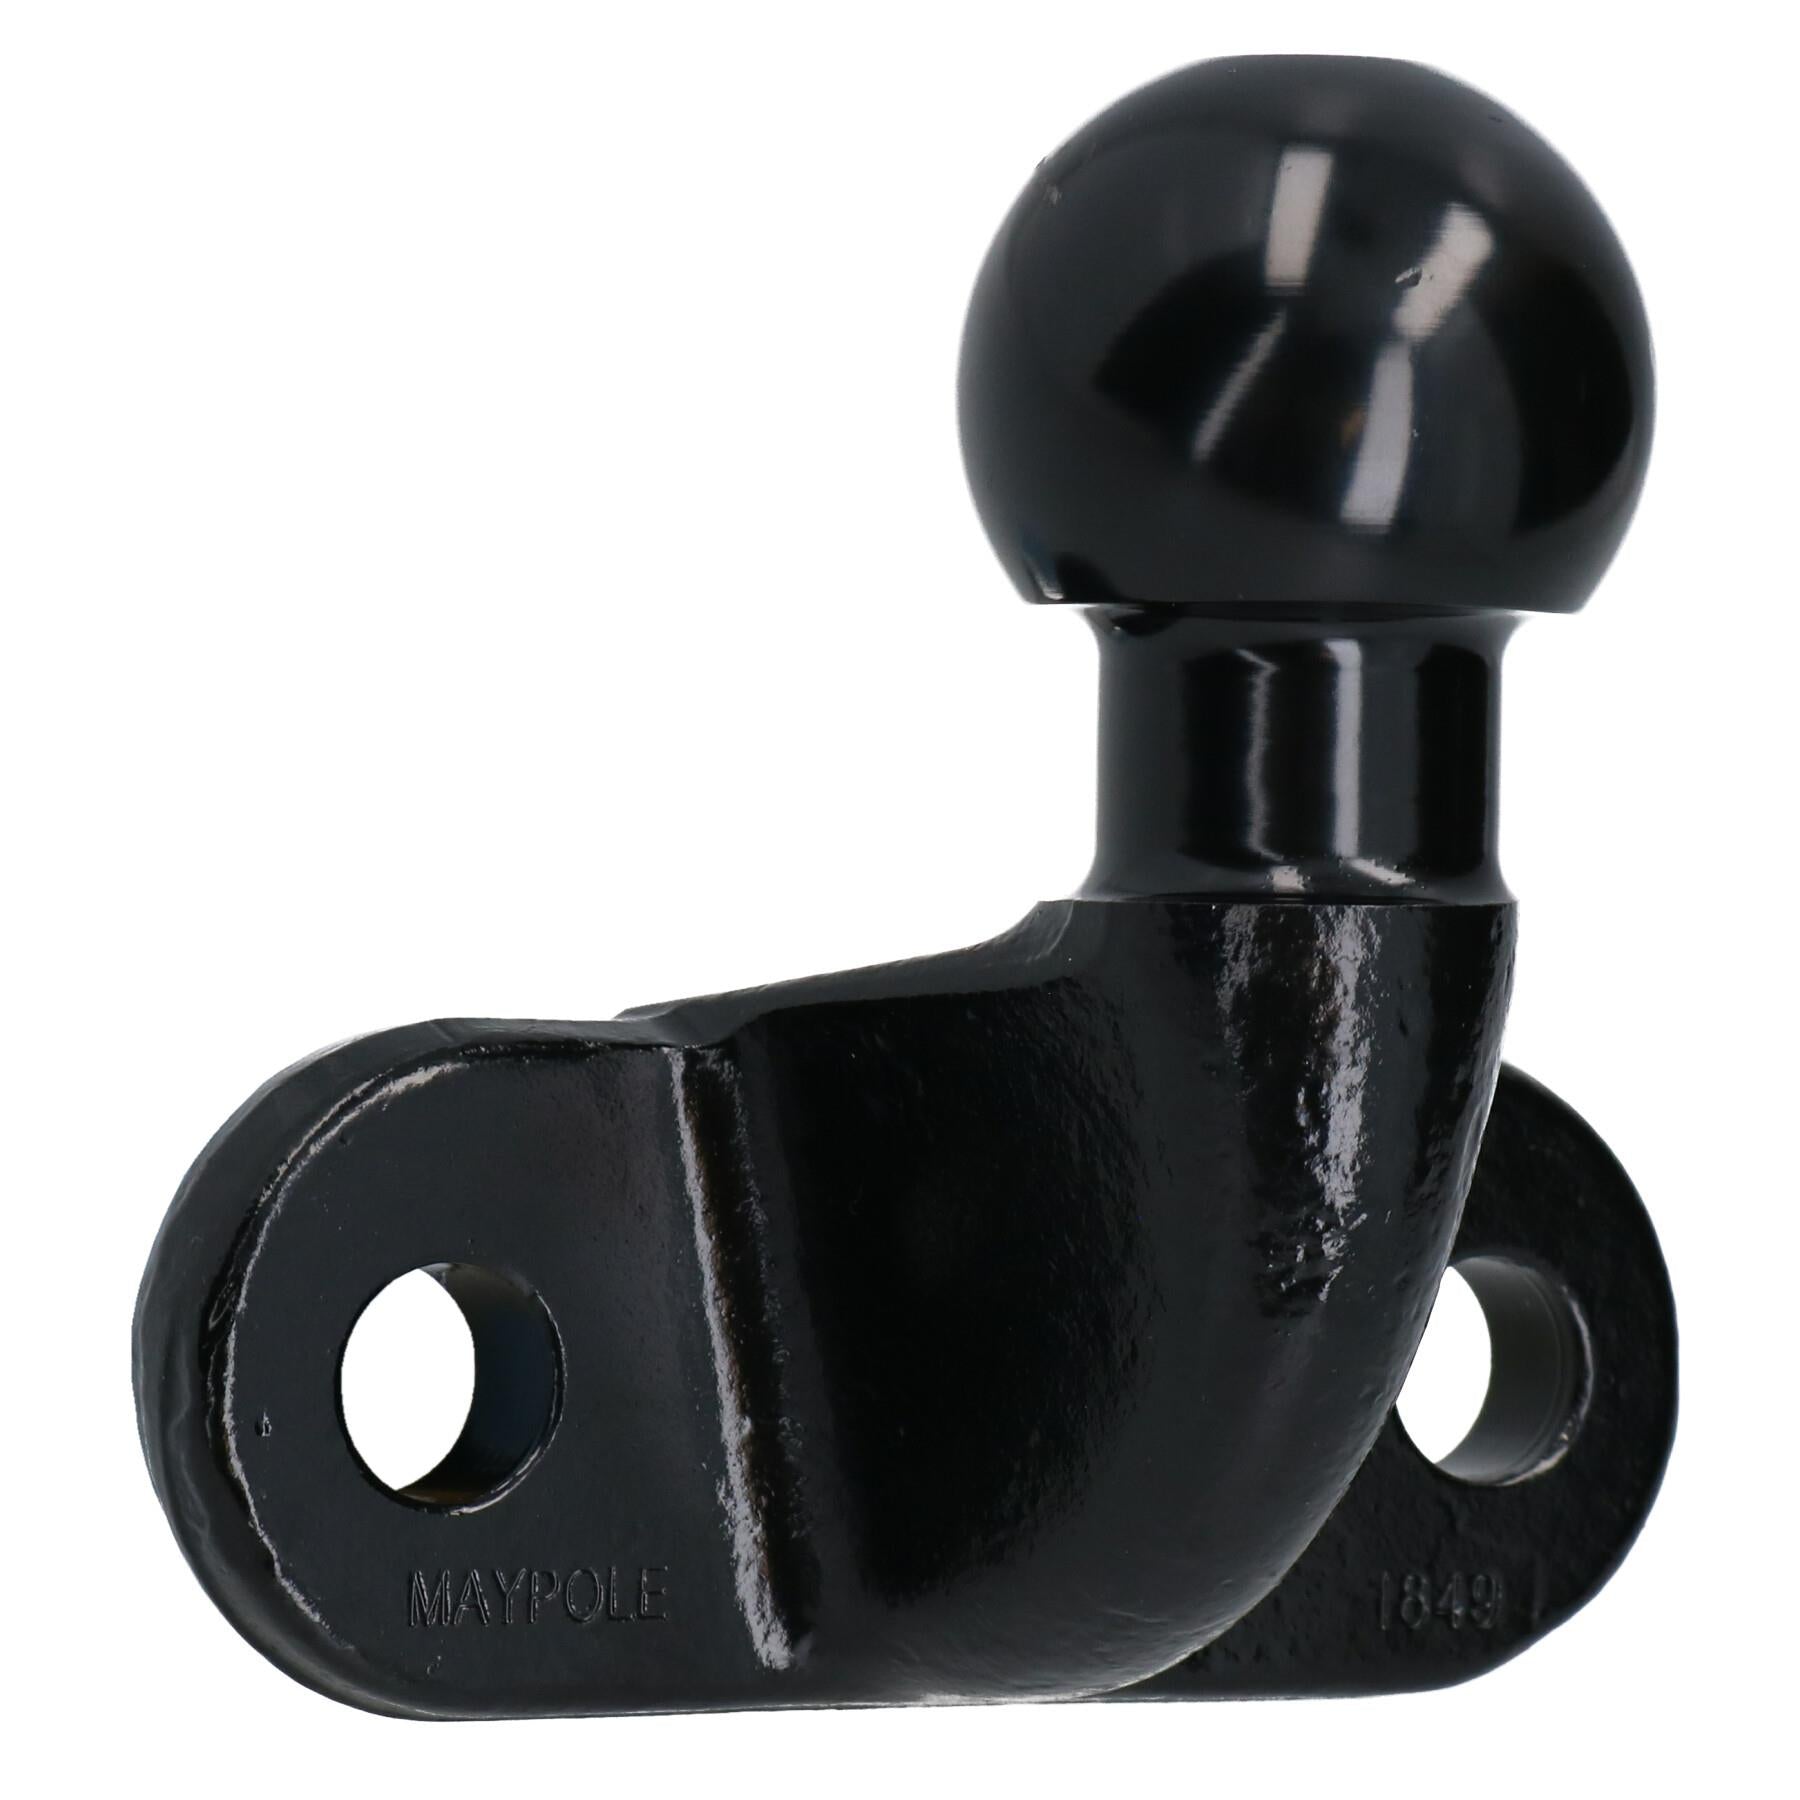 HEAVY DUTY 50mm BLACK Tow Ball for Tow Bar Standard Fitment EU Approved